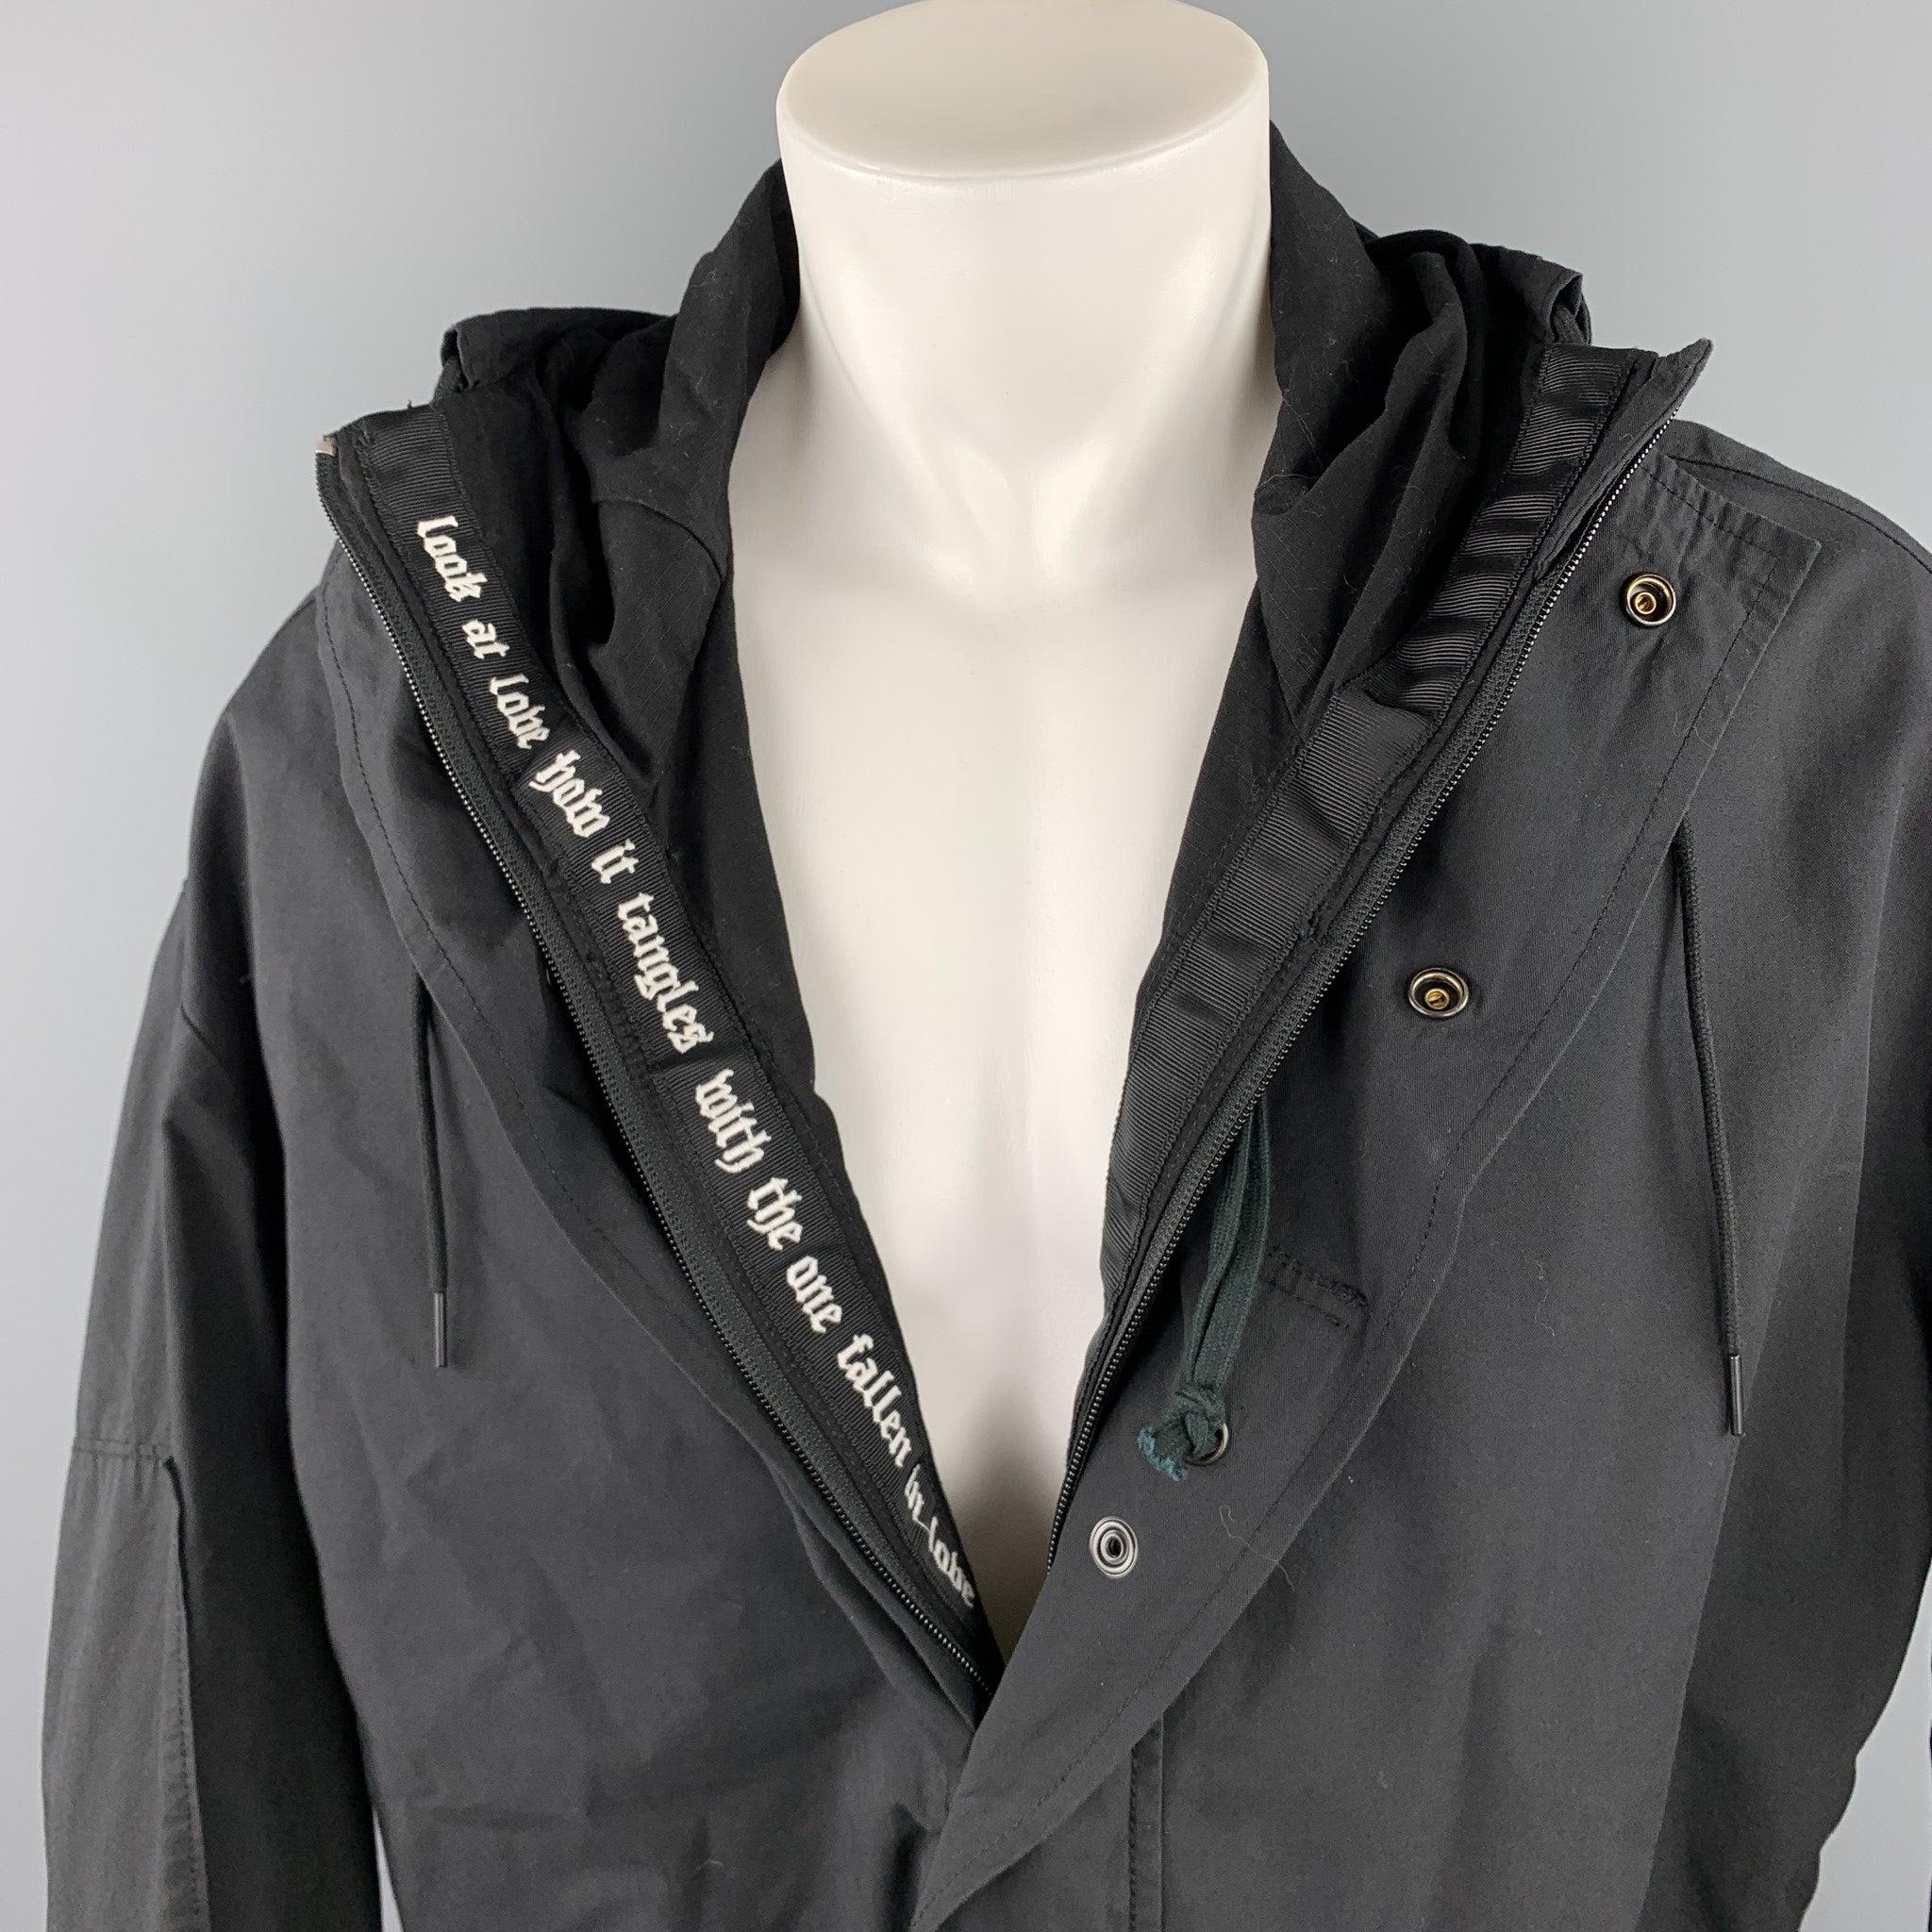 R 13 coat comes in a black cotton / nylon featuring a oversized style, inner embroidery detail, hooded, large zipper pockets, drawstring, and a zip & snap button closure.
Very Good
Pre-Owned Condition. 

Marked:  XS 

Measurements: 
 
Shoulder: 25